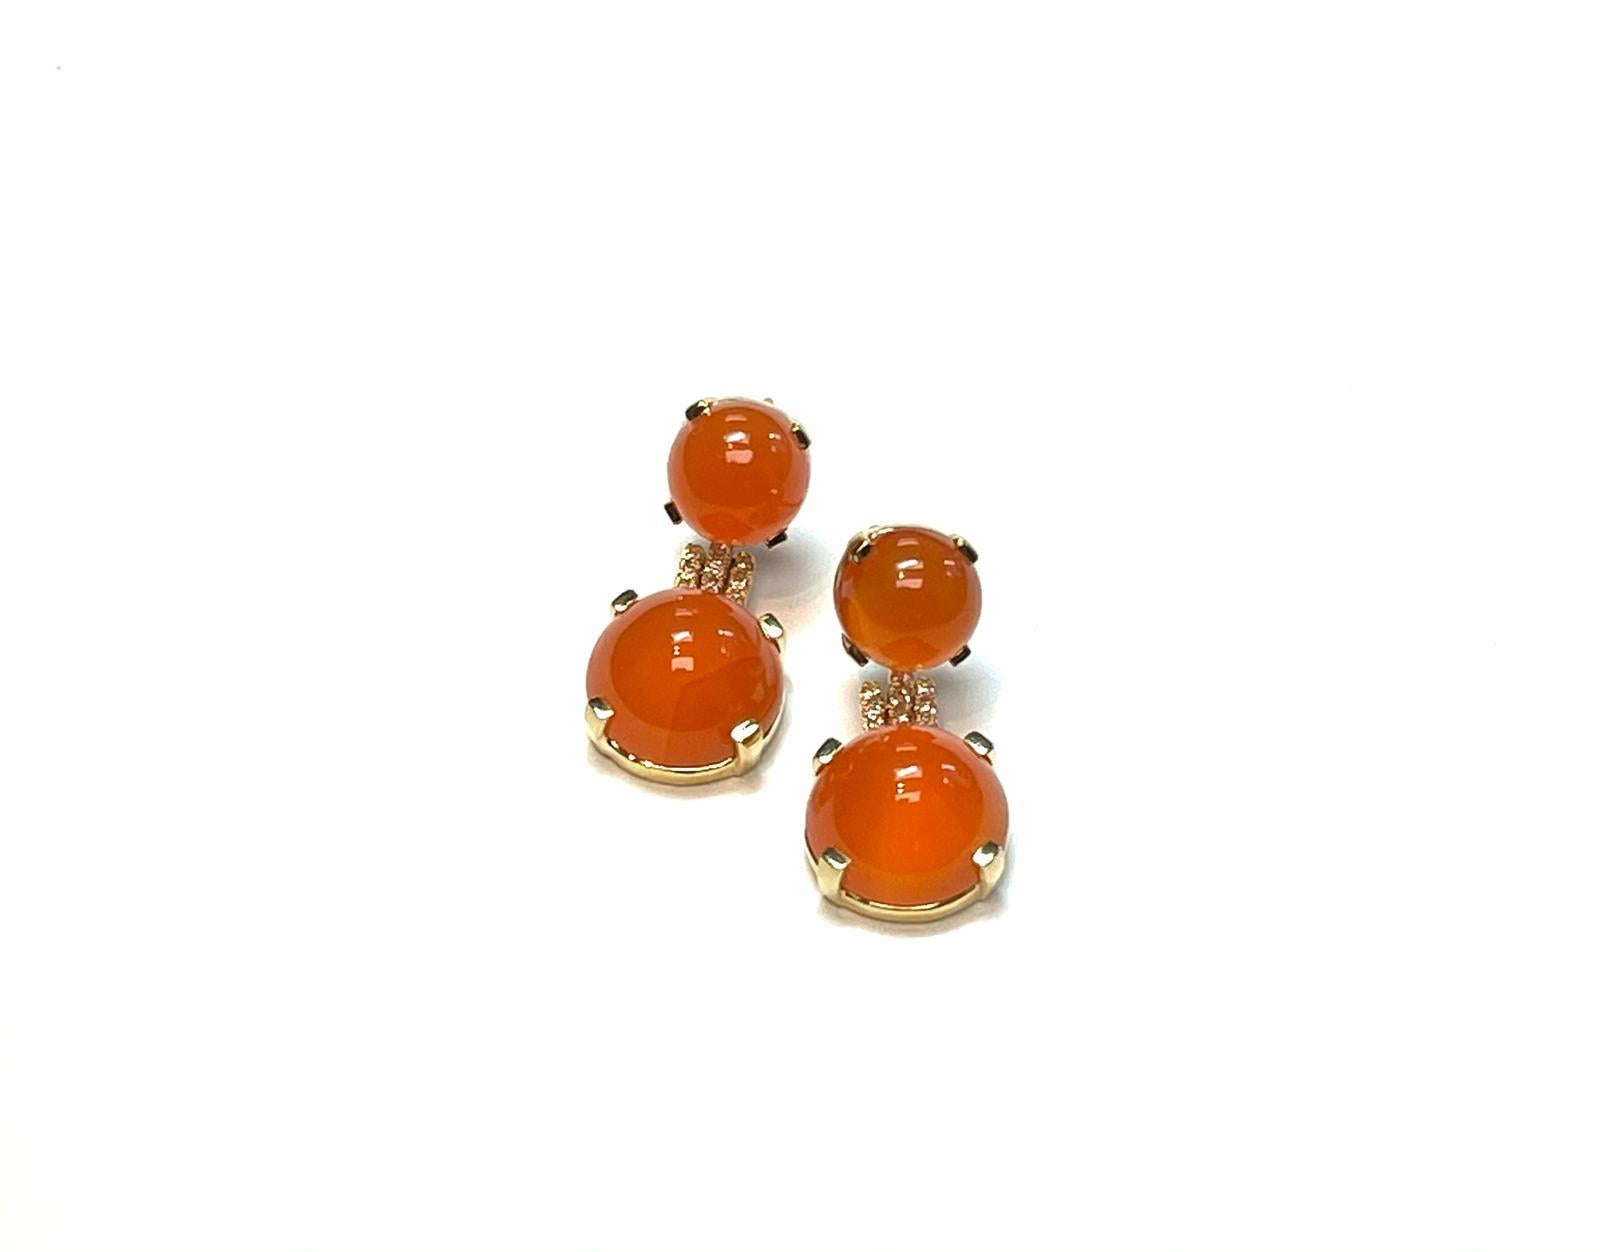 Step into the spotlight with our Orange Chalcedony Cabochon Earrings from the 'Rock 'N Roll' Collection. Crafted in luxurious 18K Yellow Gold and adorned with dazzling diamonds, these earrings are a perfect blend of elegance and edginess. The